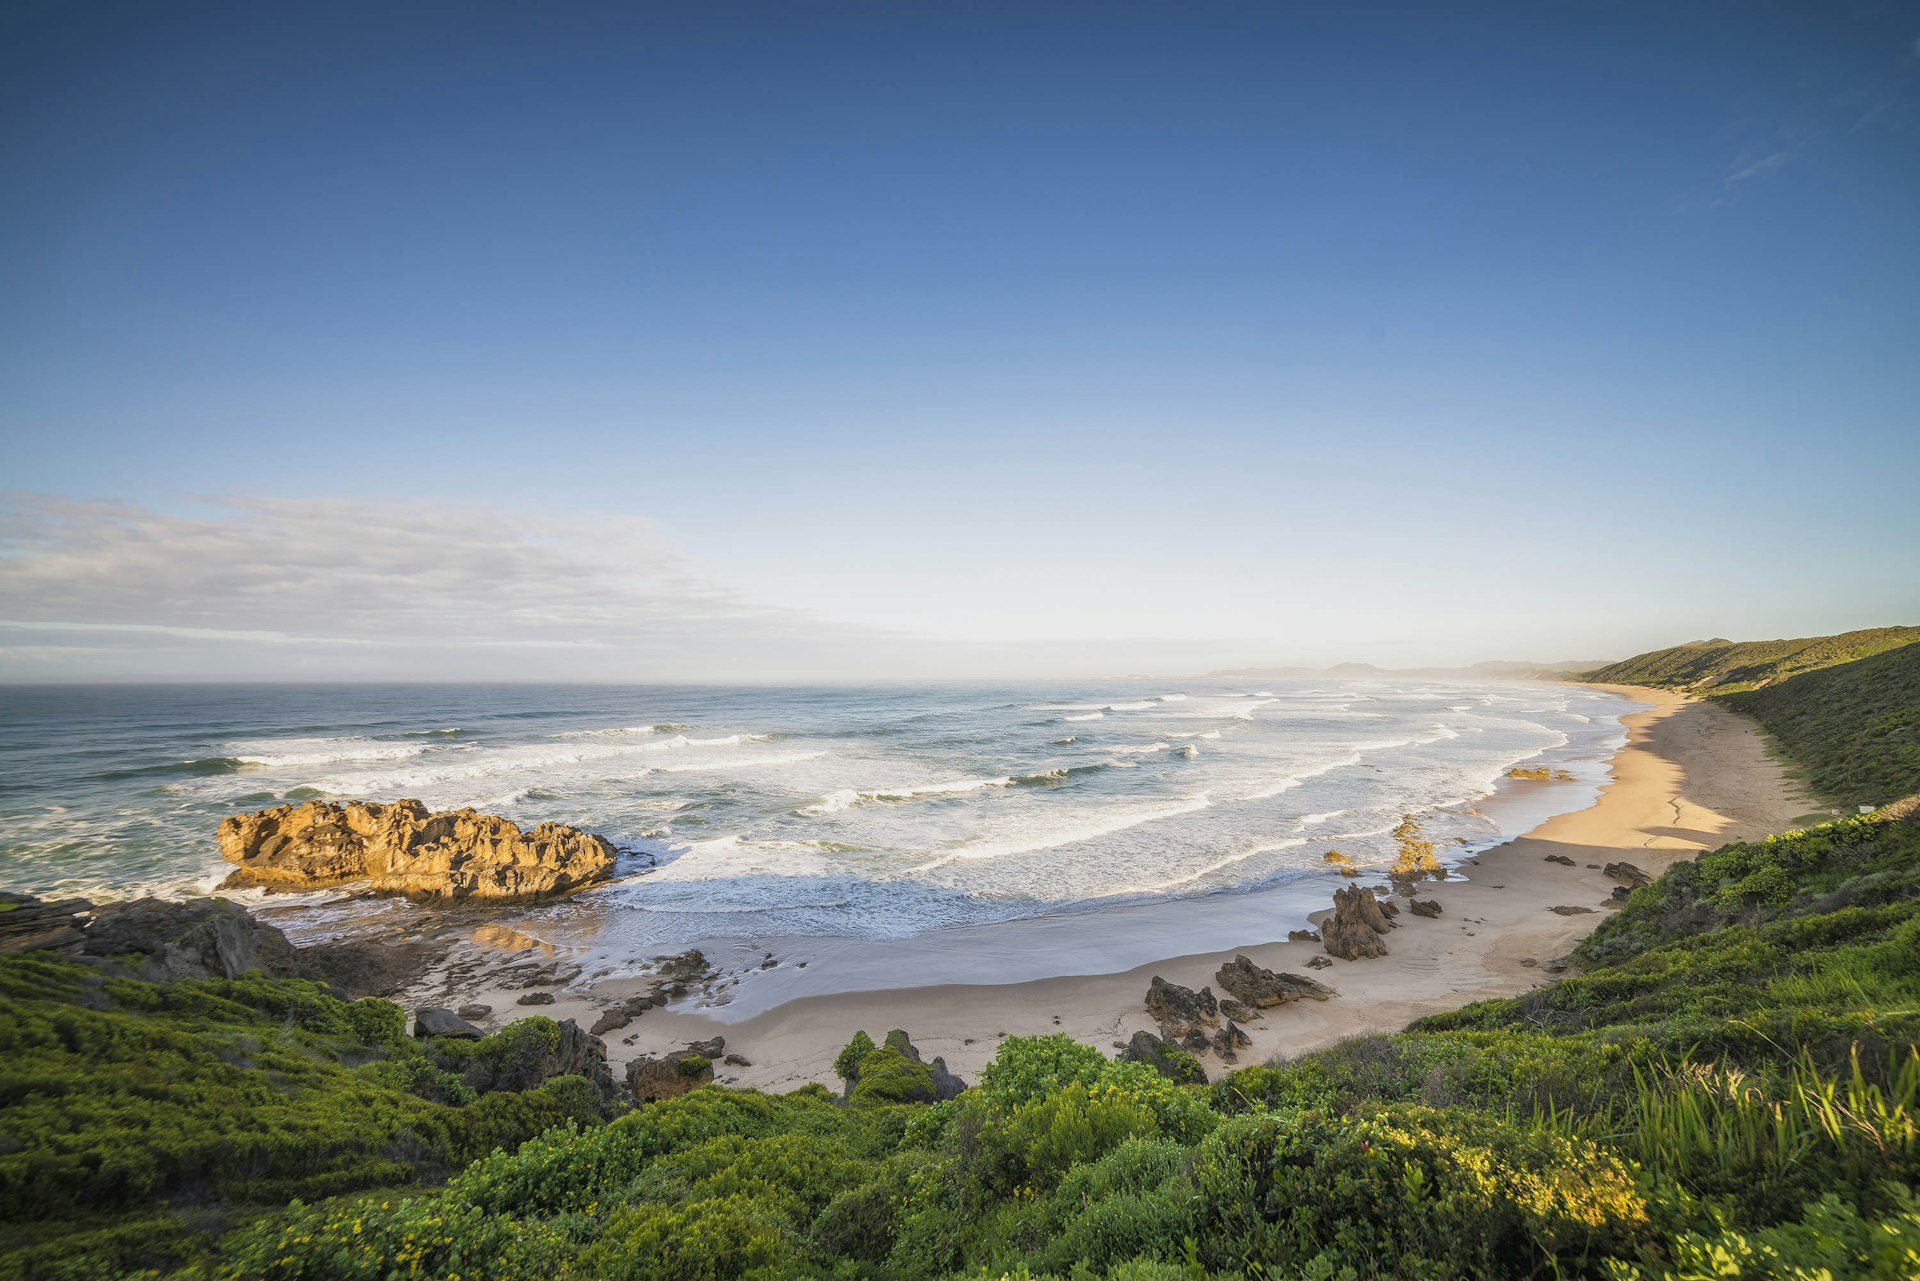 The ocean view form the village of Brenton near Knysna, South Africa